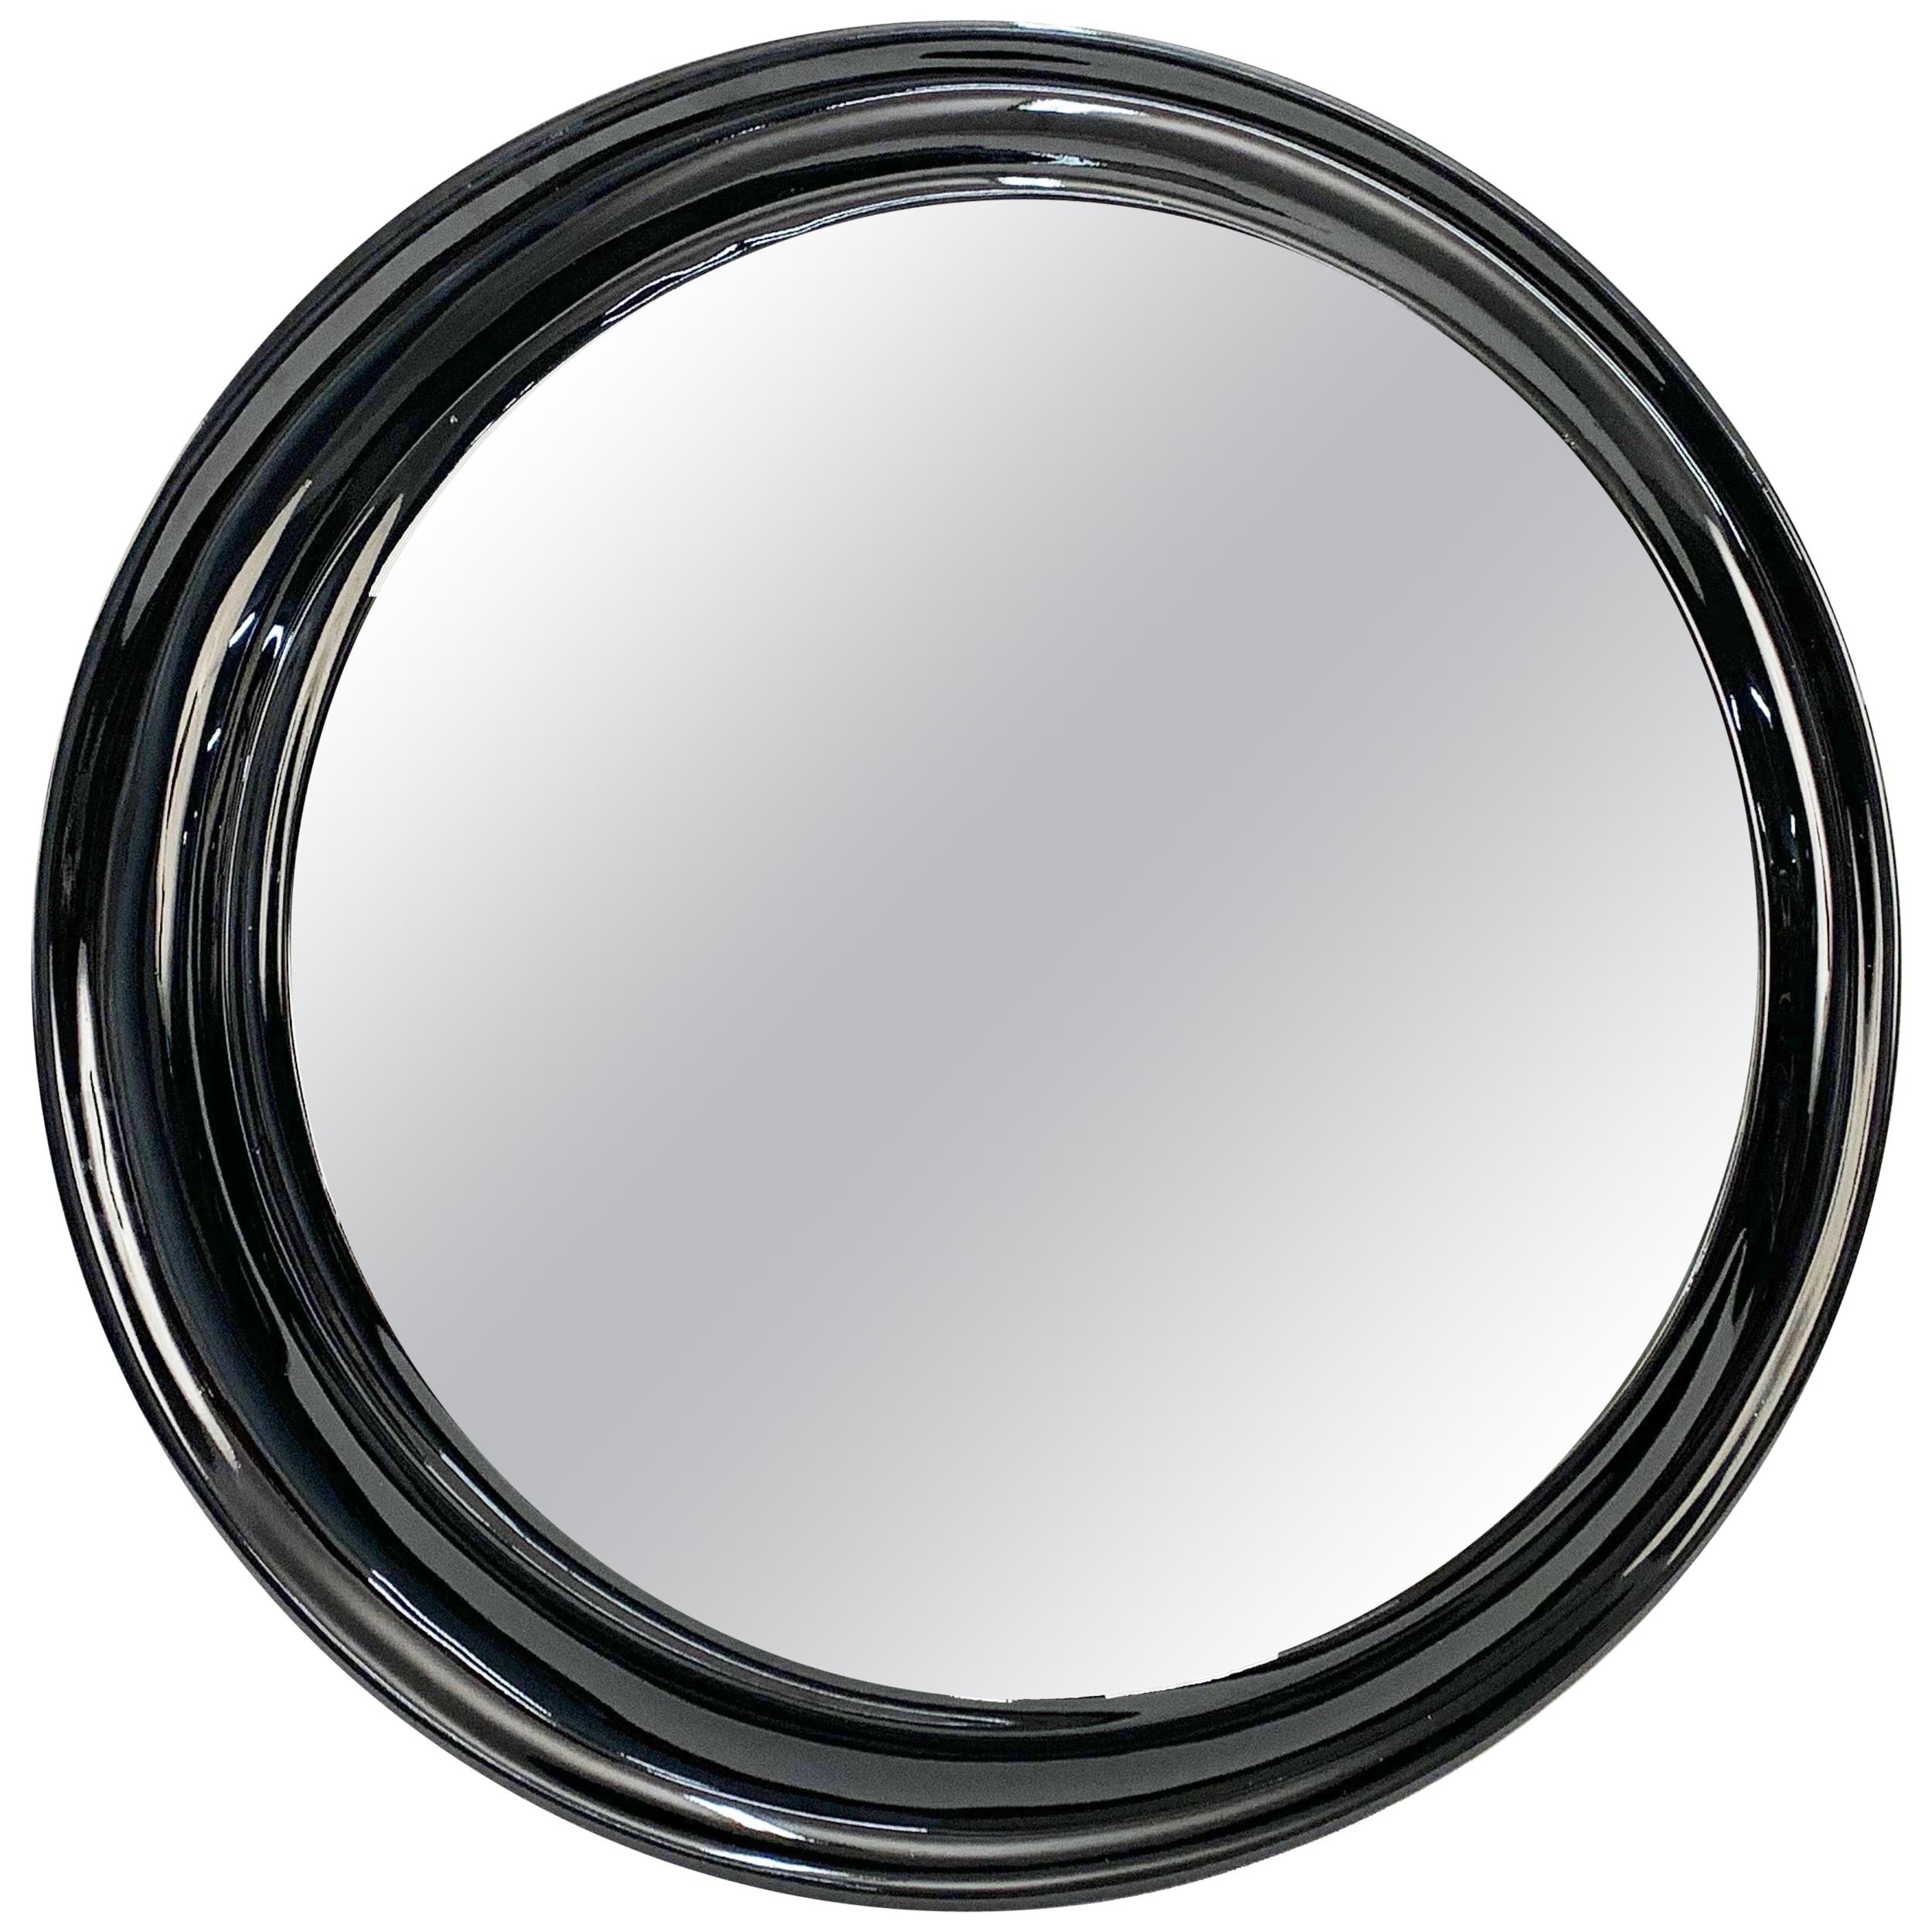 Midcentury Round Italian Mirror with Black Lacquered Resin Frame, 1970s